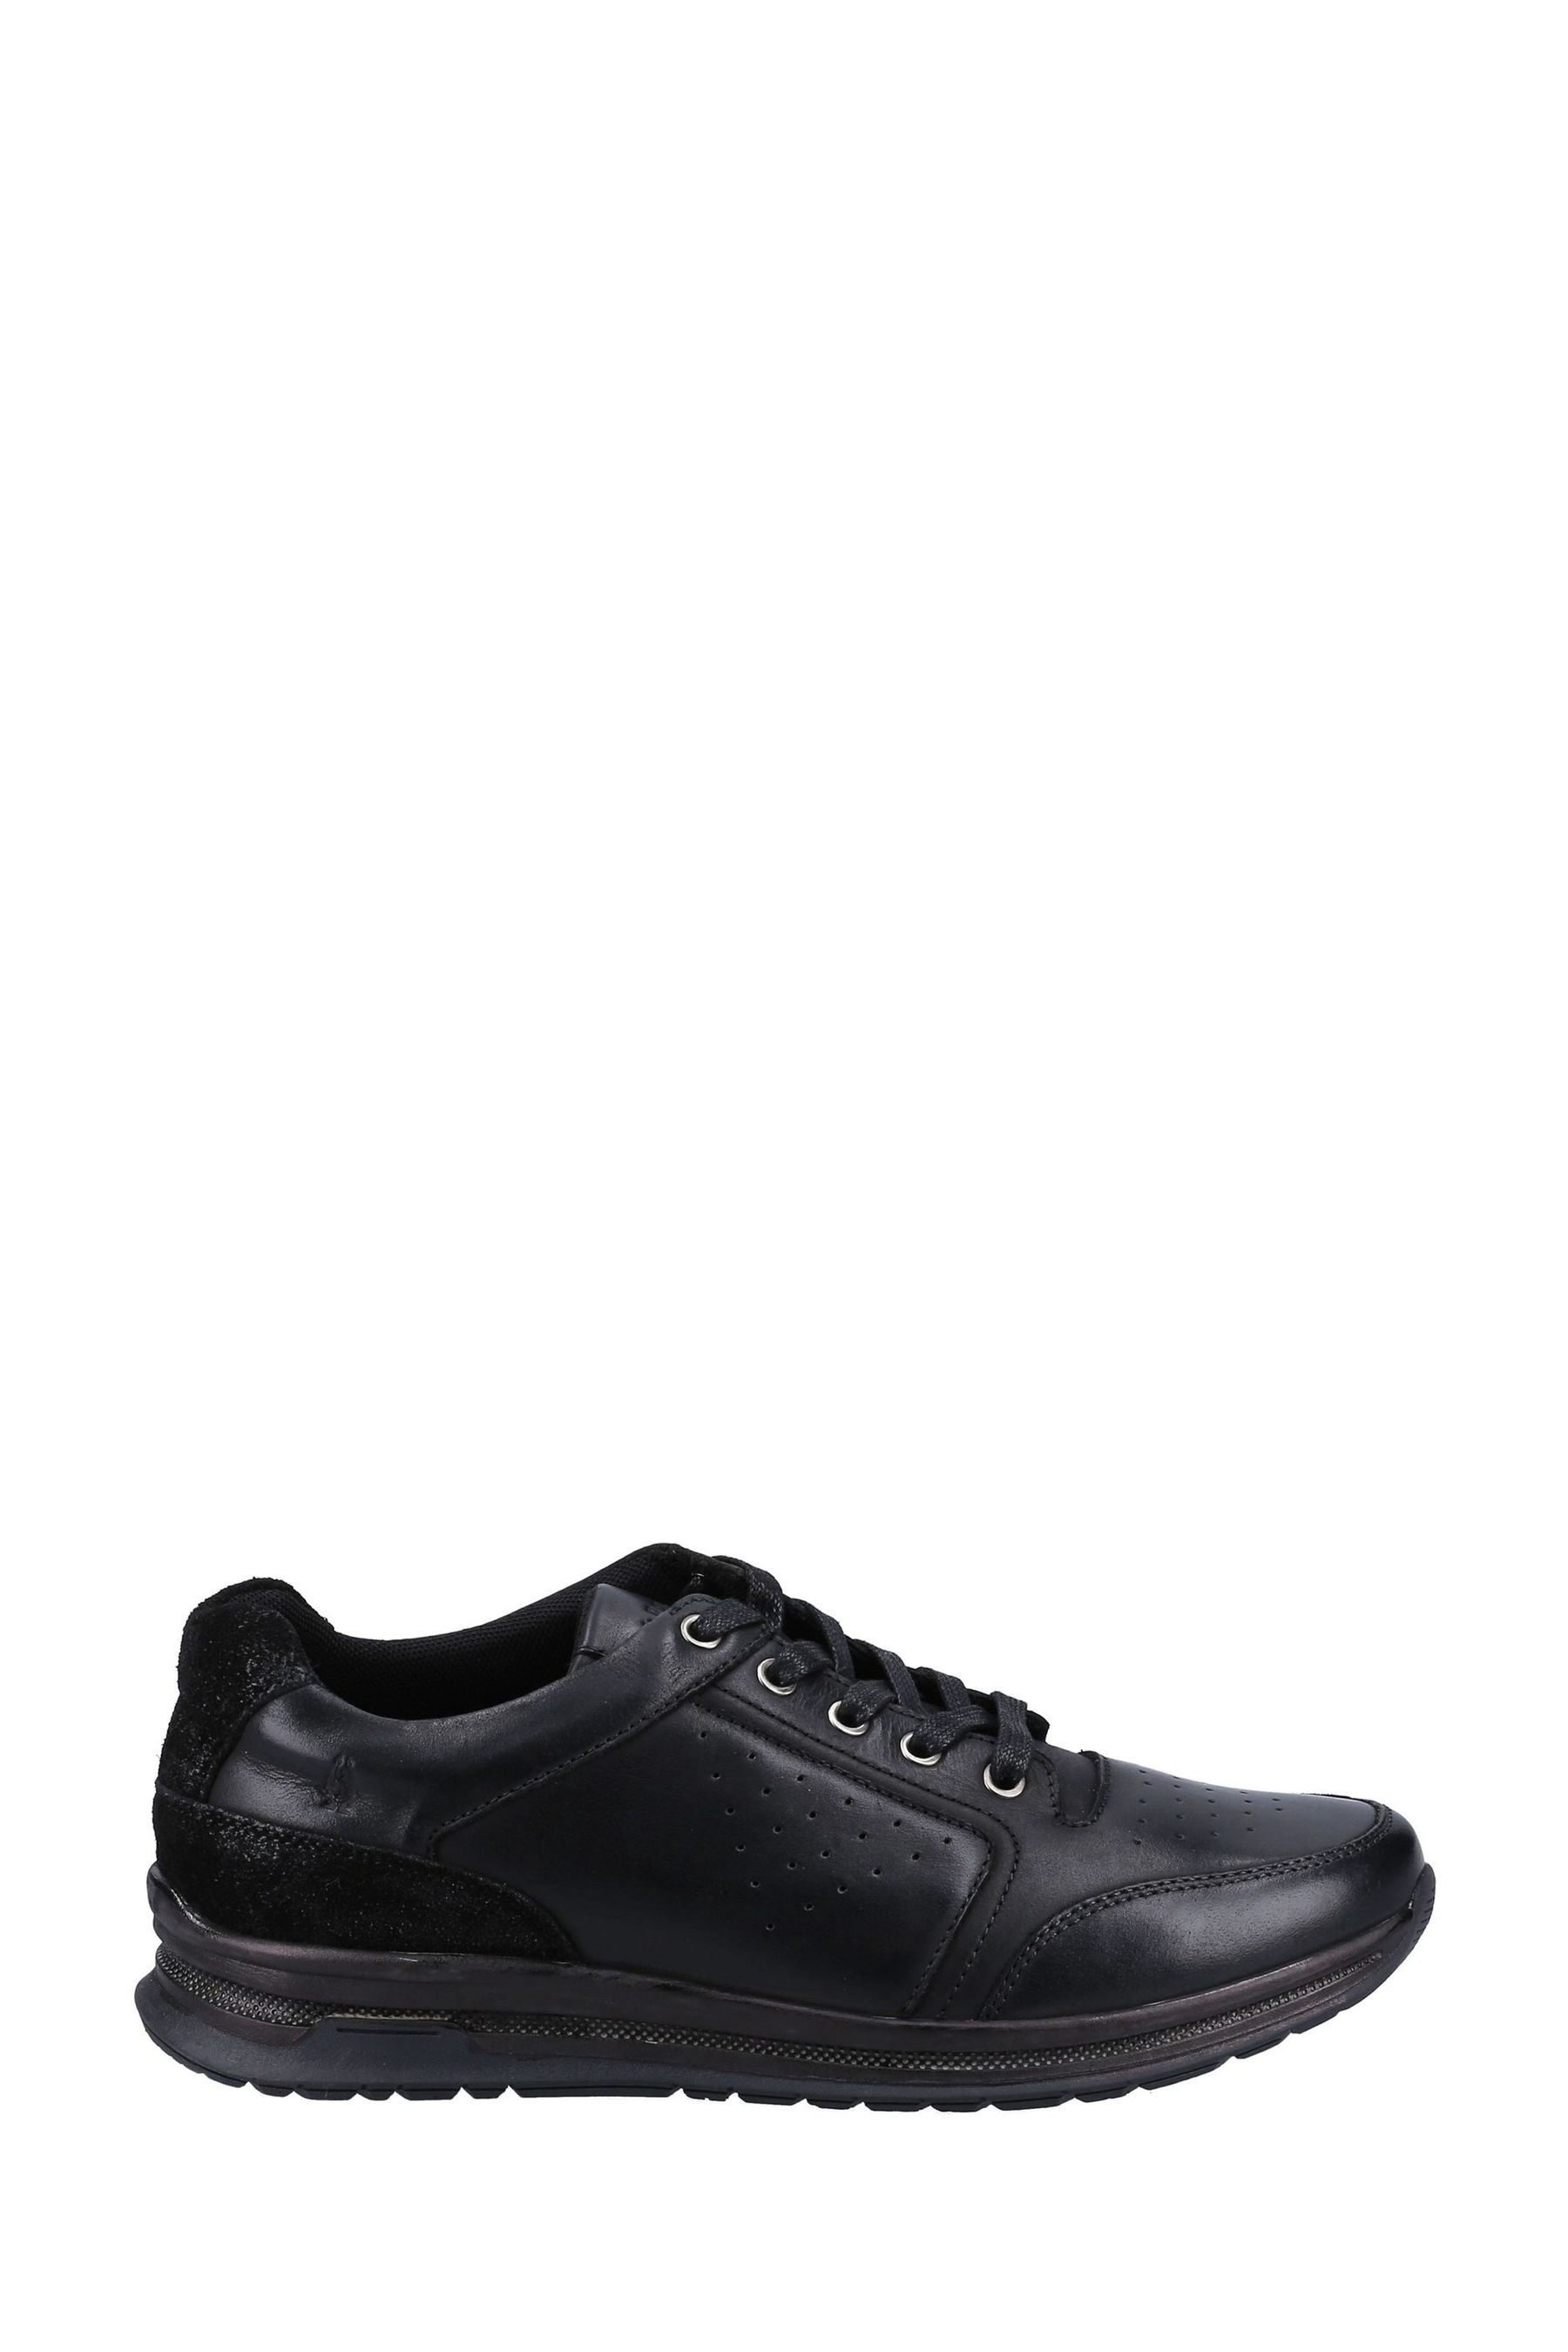 Buy Hush Puppies Joseph Lace Up Black Shoes from the Next UK online shop